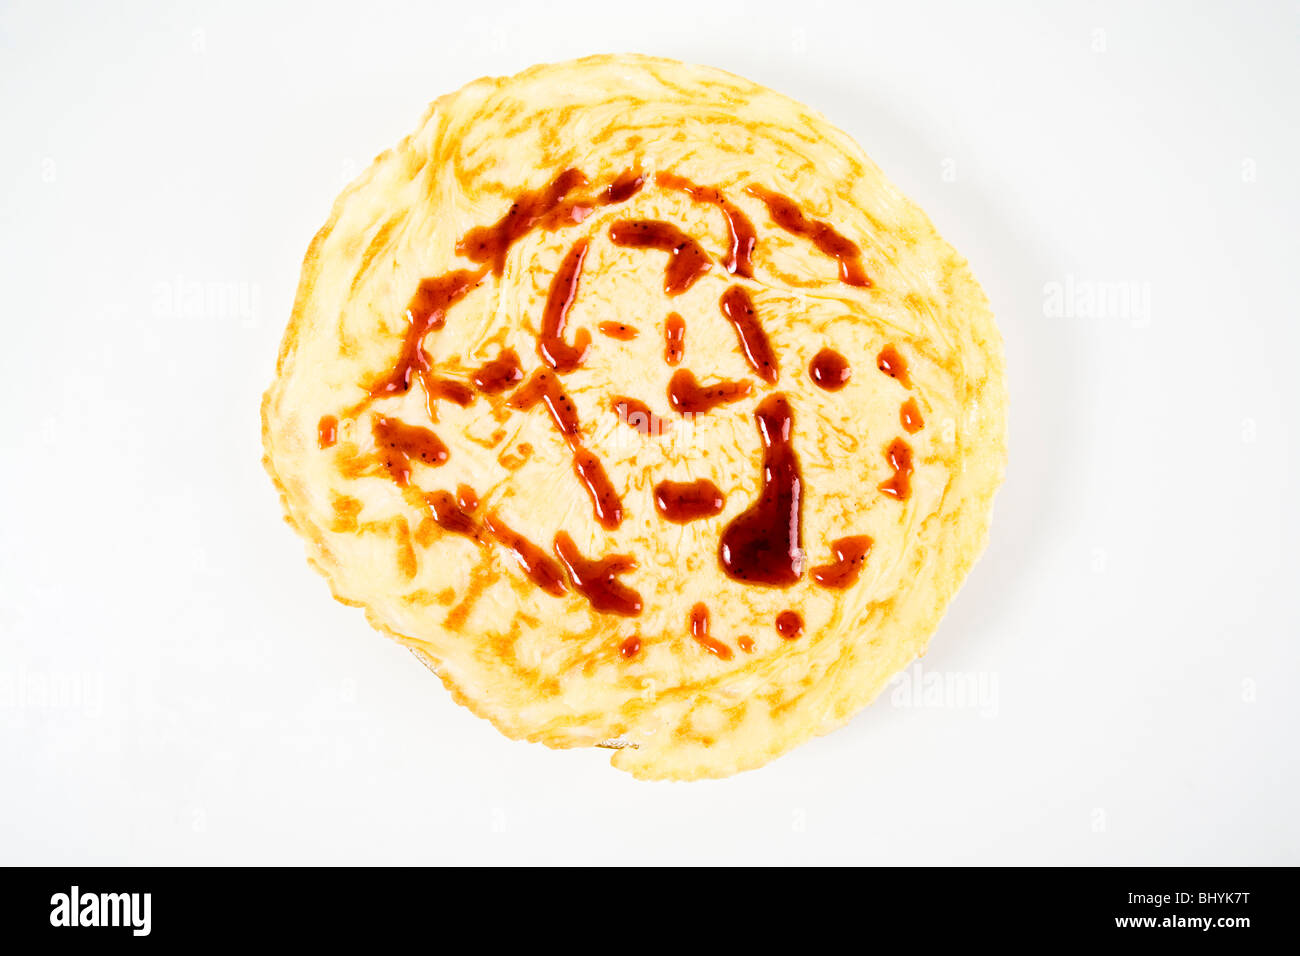 pancake with jam on a plate Stock Photo